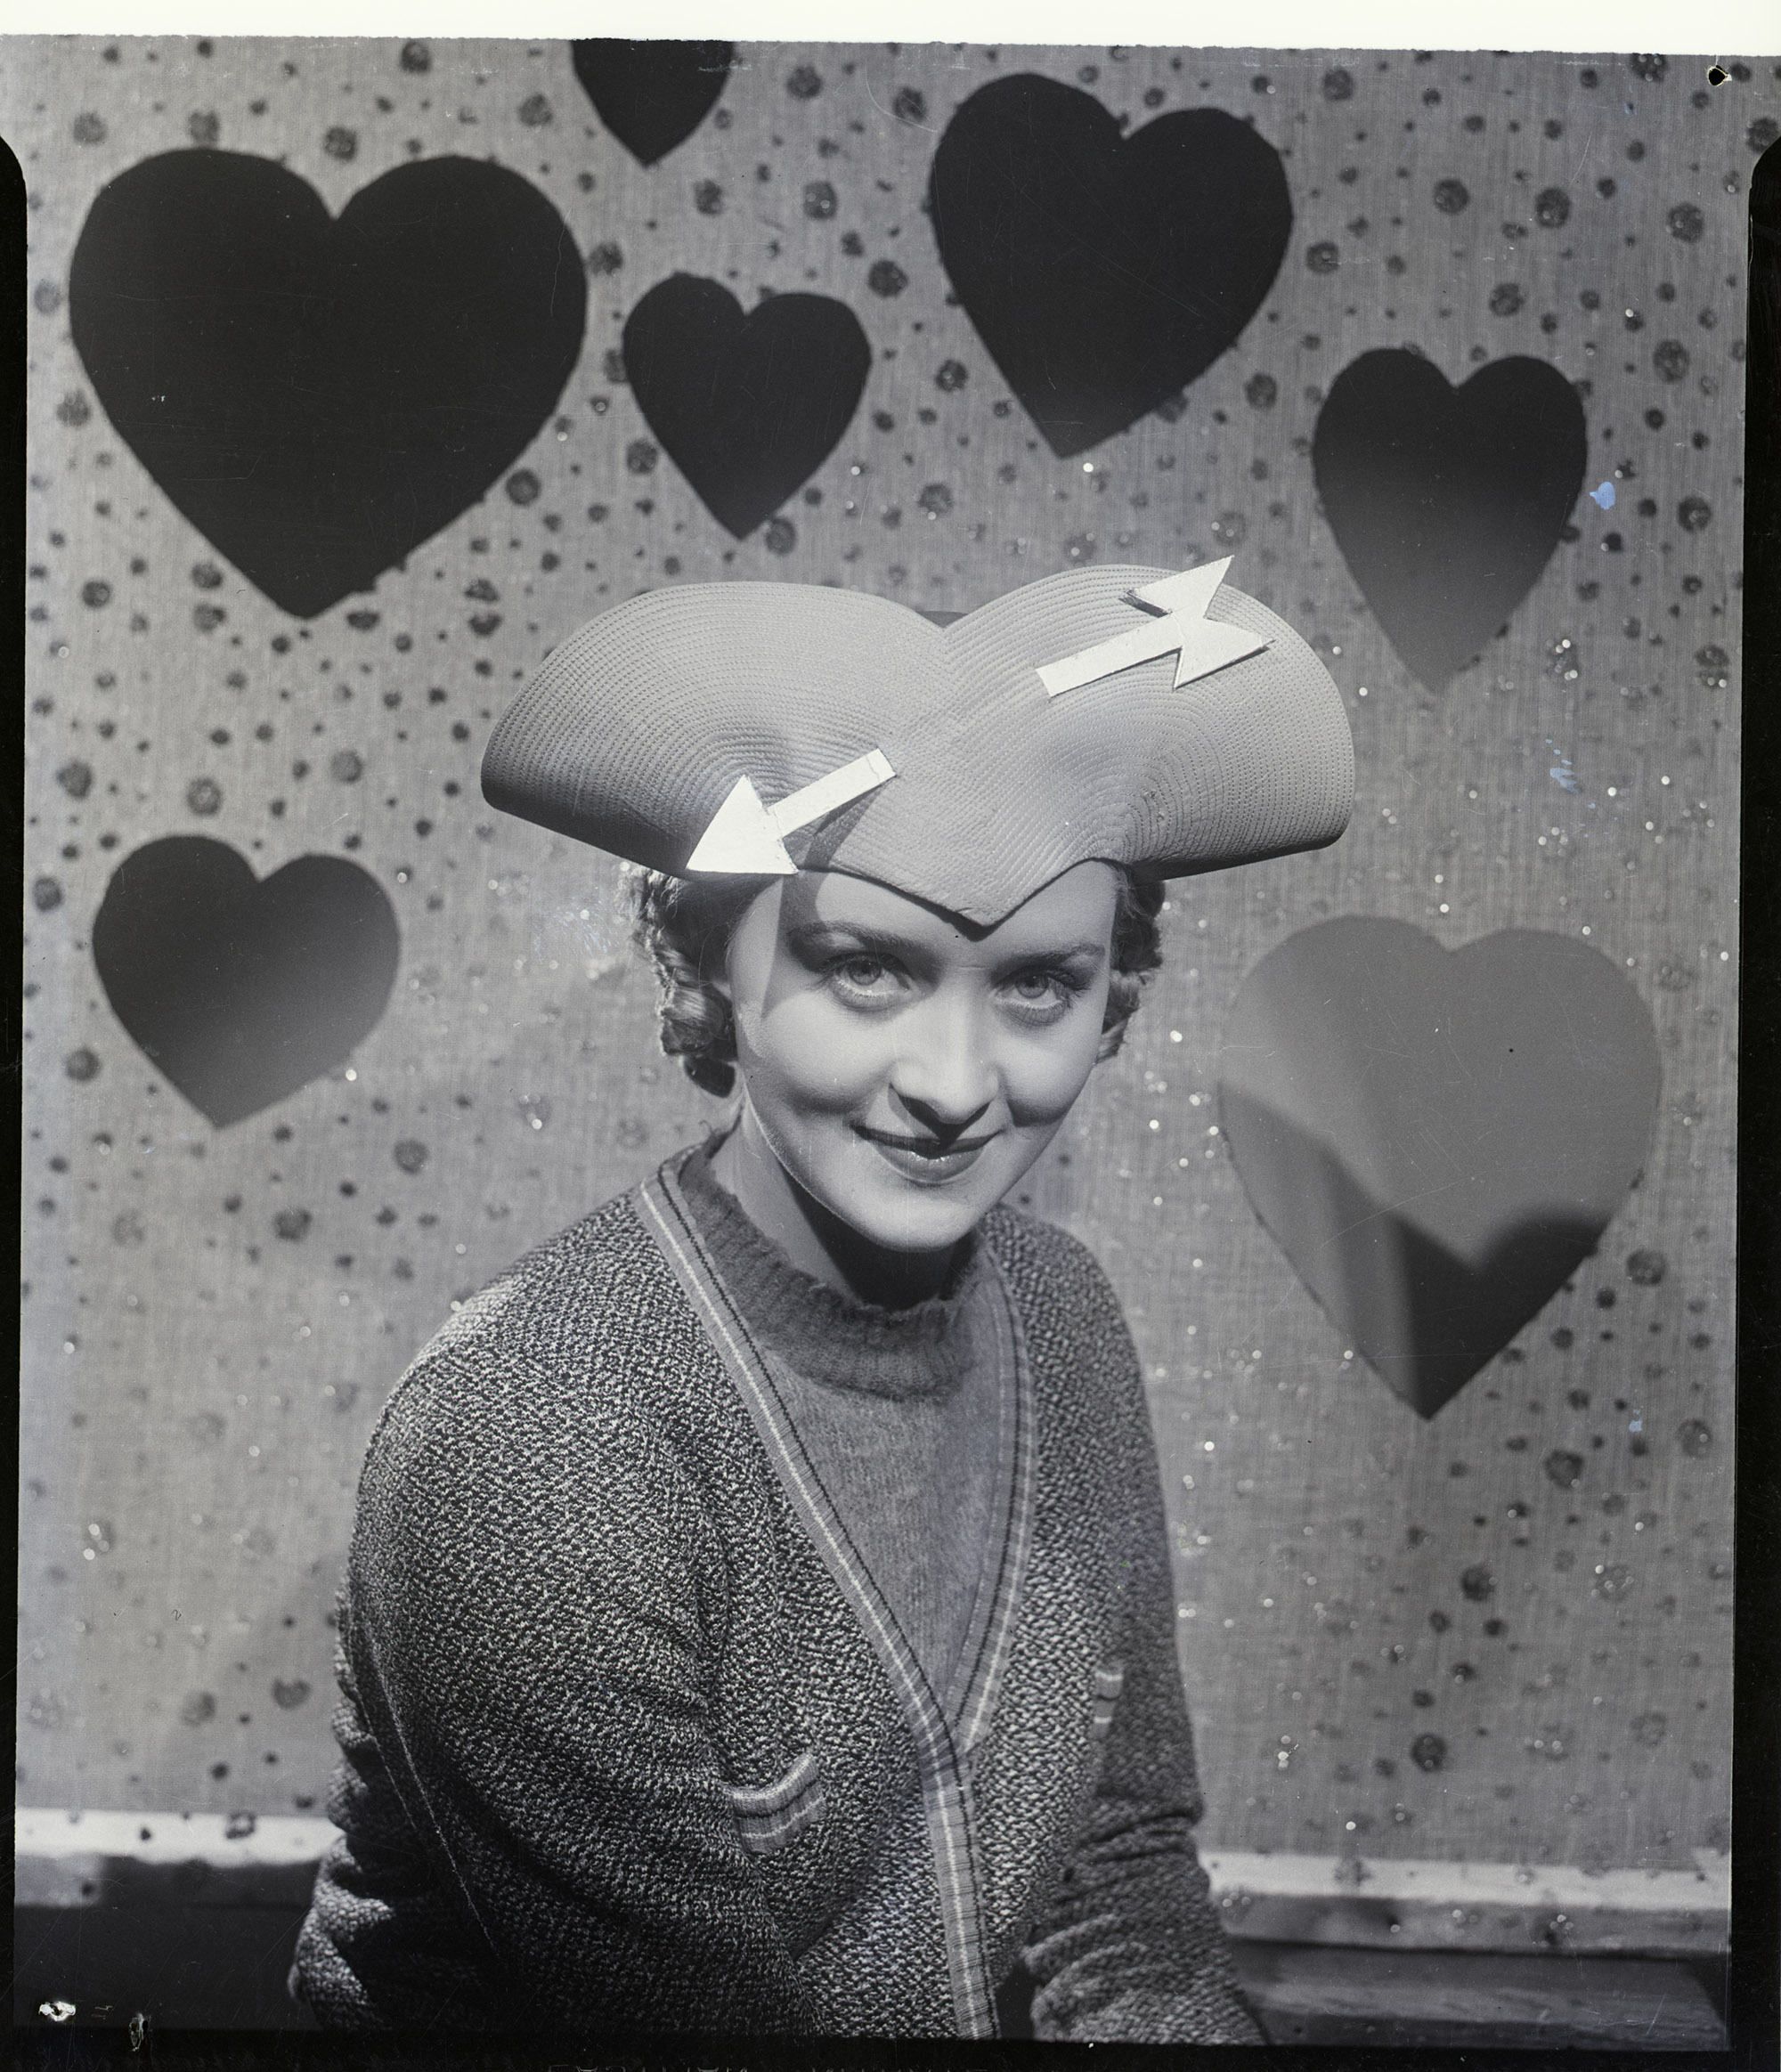 a "Be my valentine" hat is worn by actress Marian Marsh. The hat has curves in the shape of a heart to fit on the head with a gilded arrow, piercing the head gear to form a decoration. Marsh is seated wearing the hat against a backround of hearts for Valentine's Day.